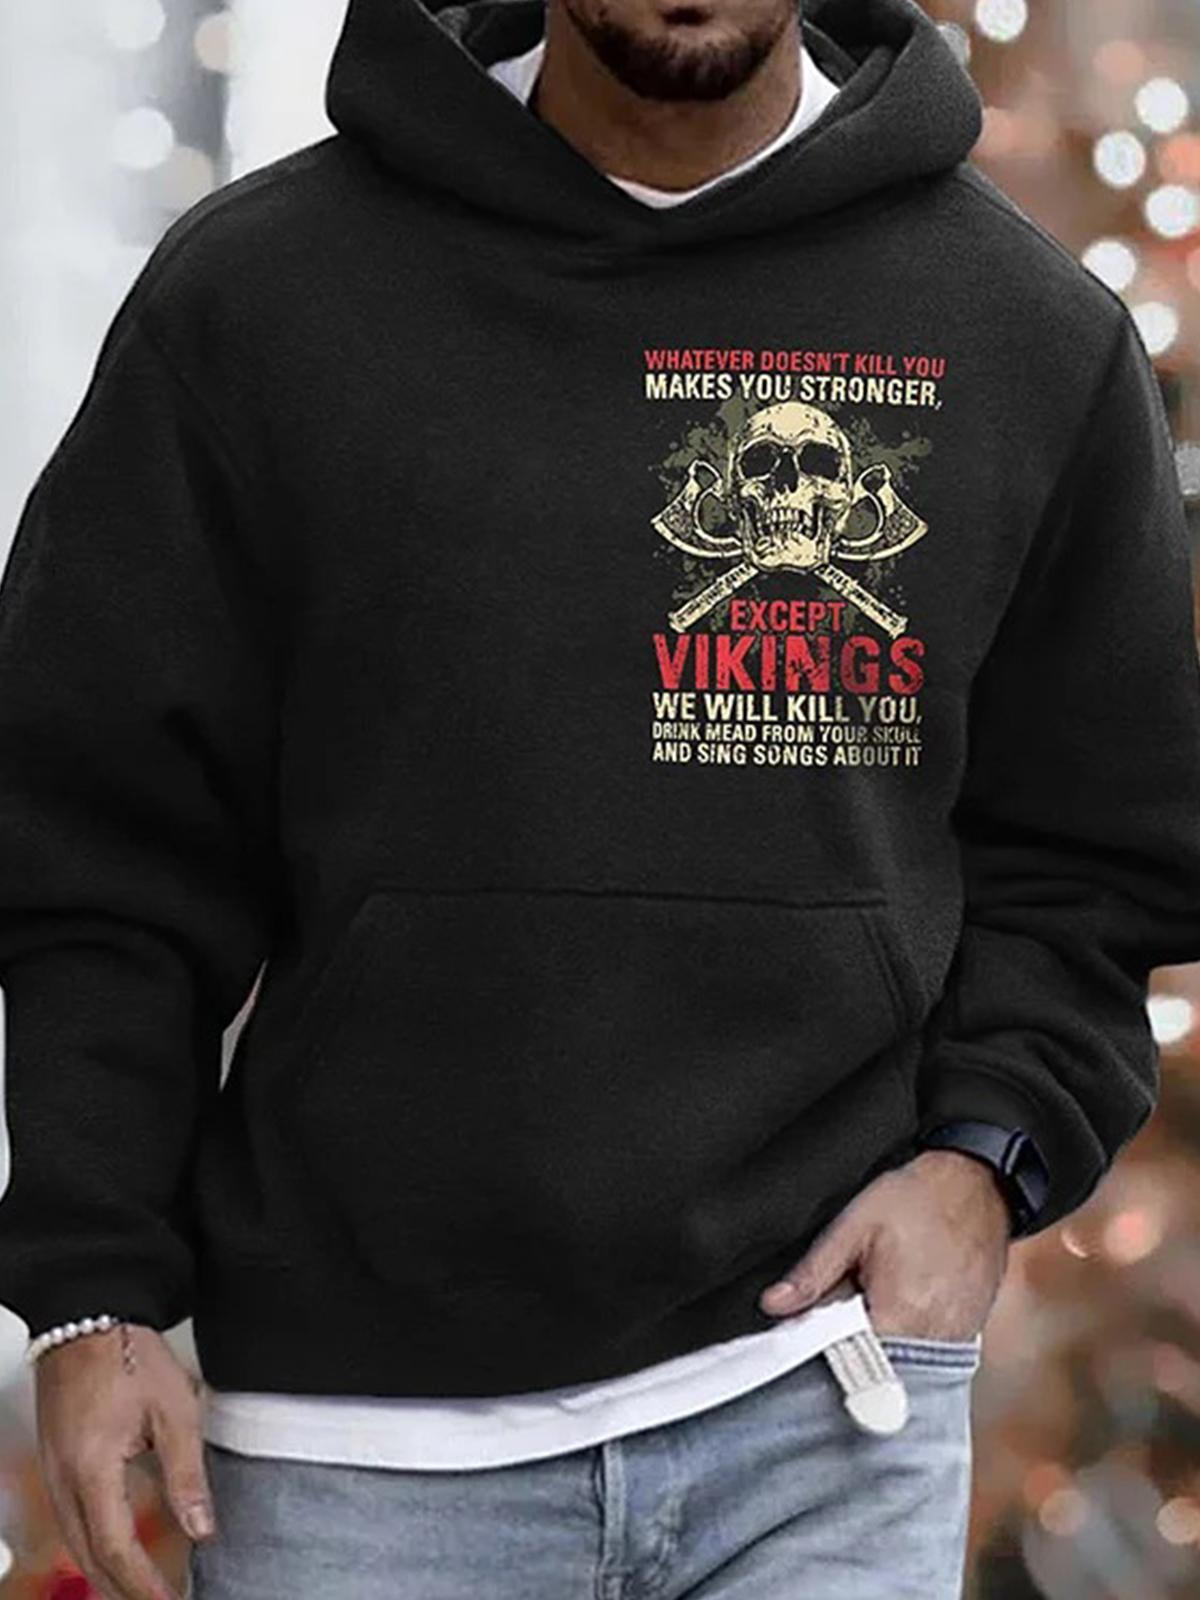 Whatever Doesn't Kill You Makes You Stronger Except Vikings Print Men's Casual Hooded Long Sleeve Sweatshirt